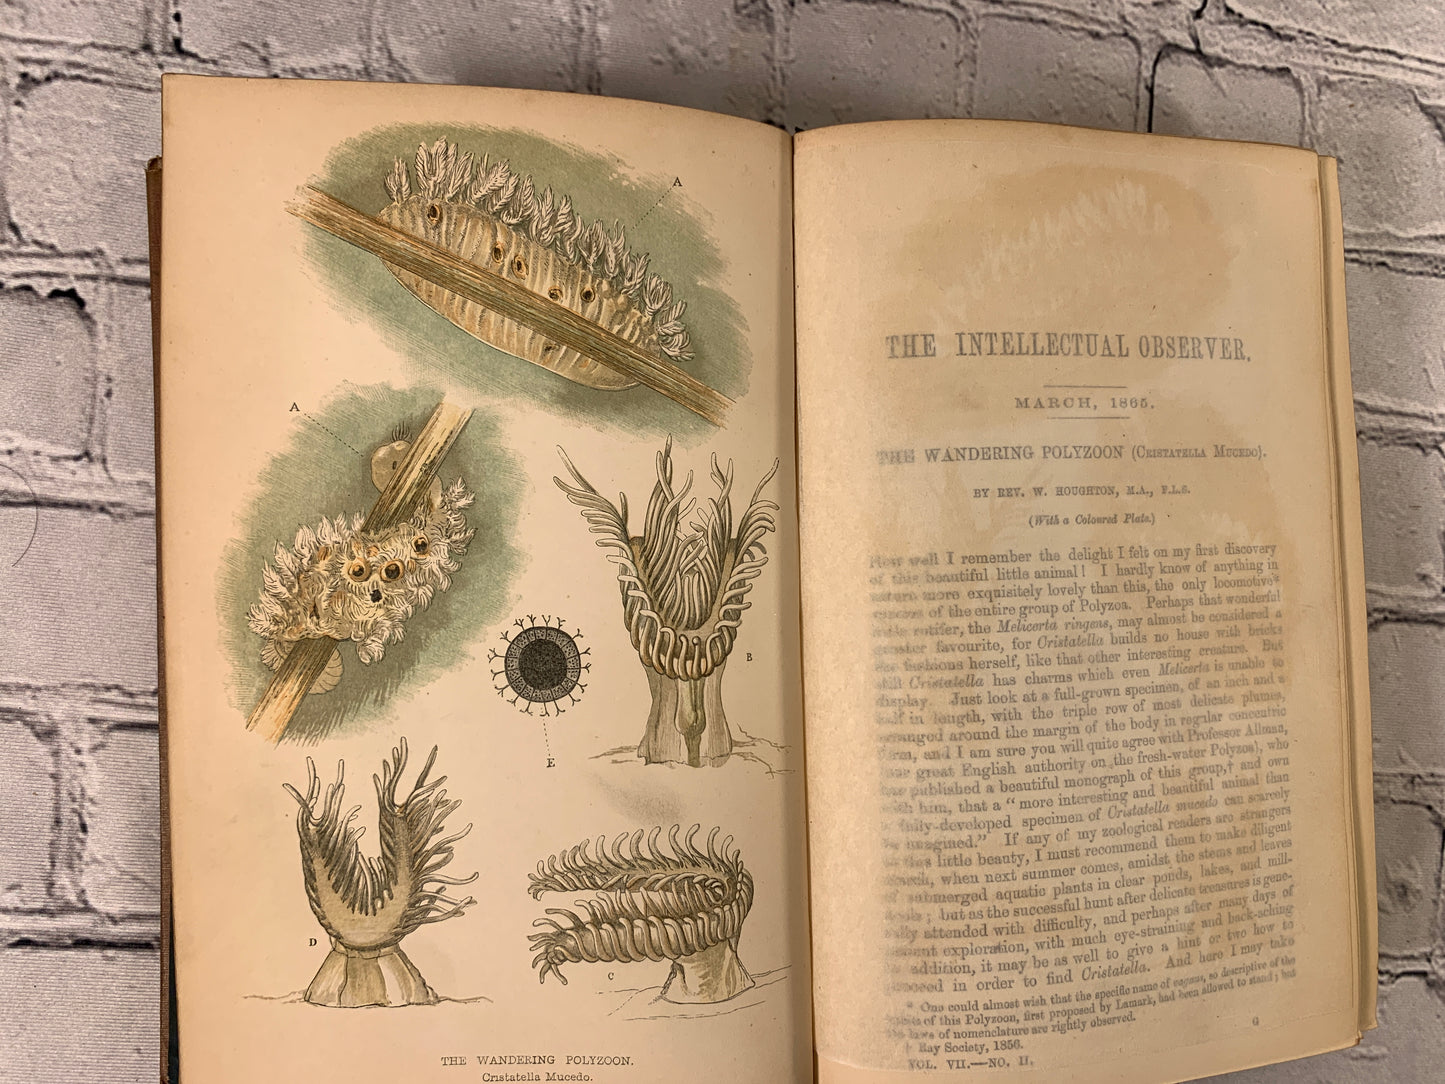 The Intellectual Observer Review of Natural History Microscopic Research [1862 · 9 Volumes]]